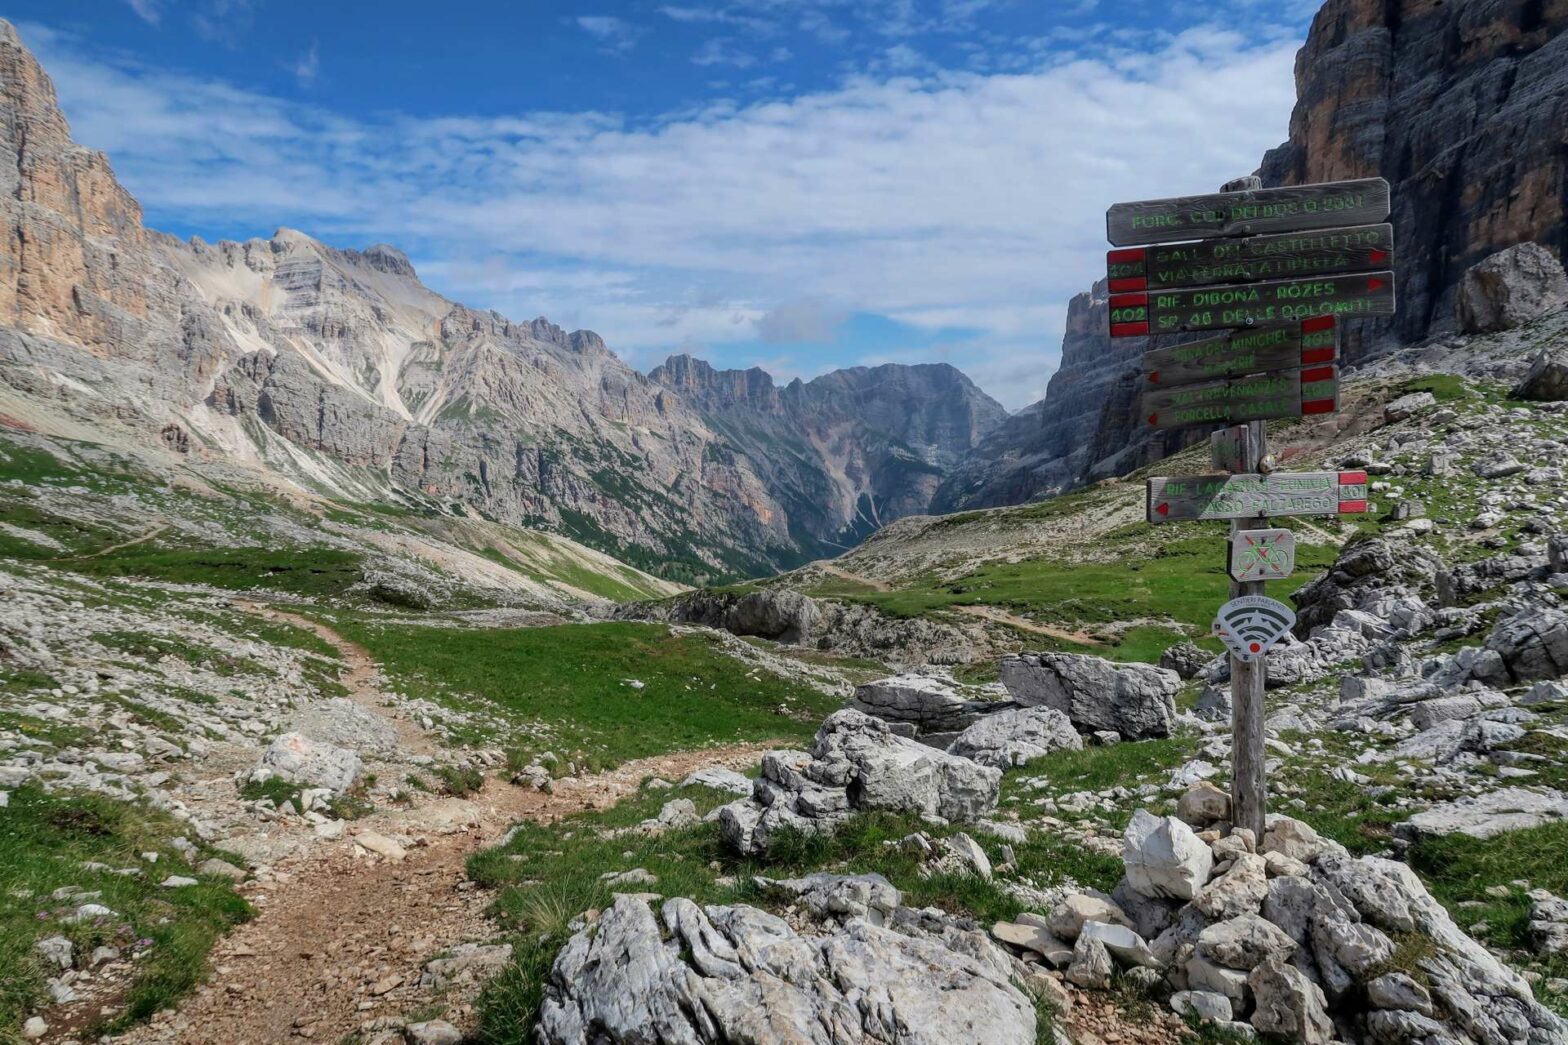 Walking down the valley from Lagazuoi in the Dolomite